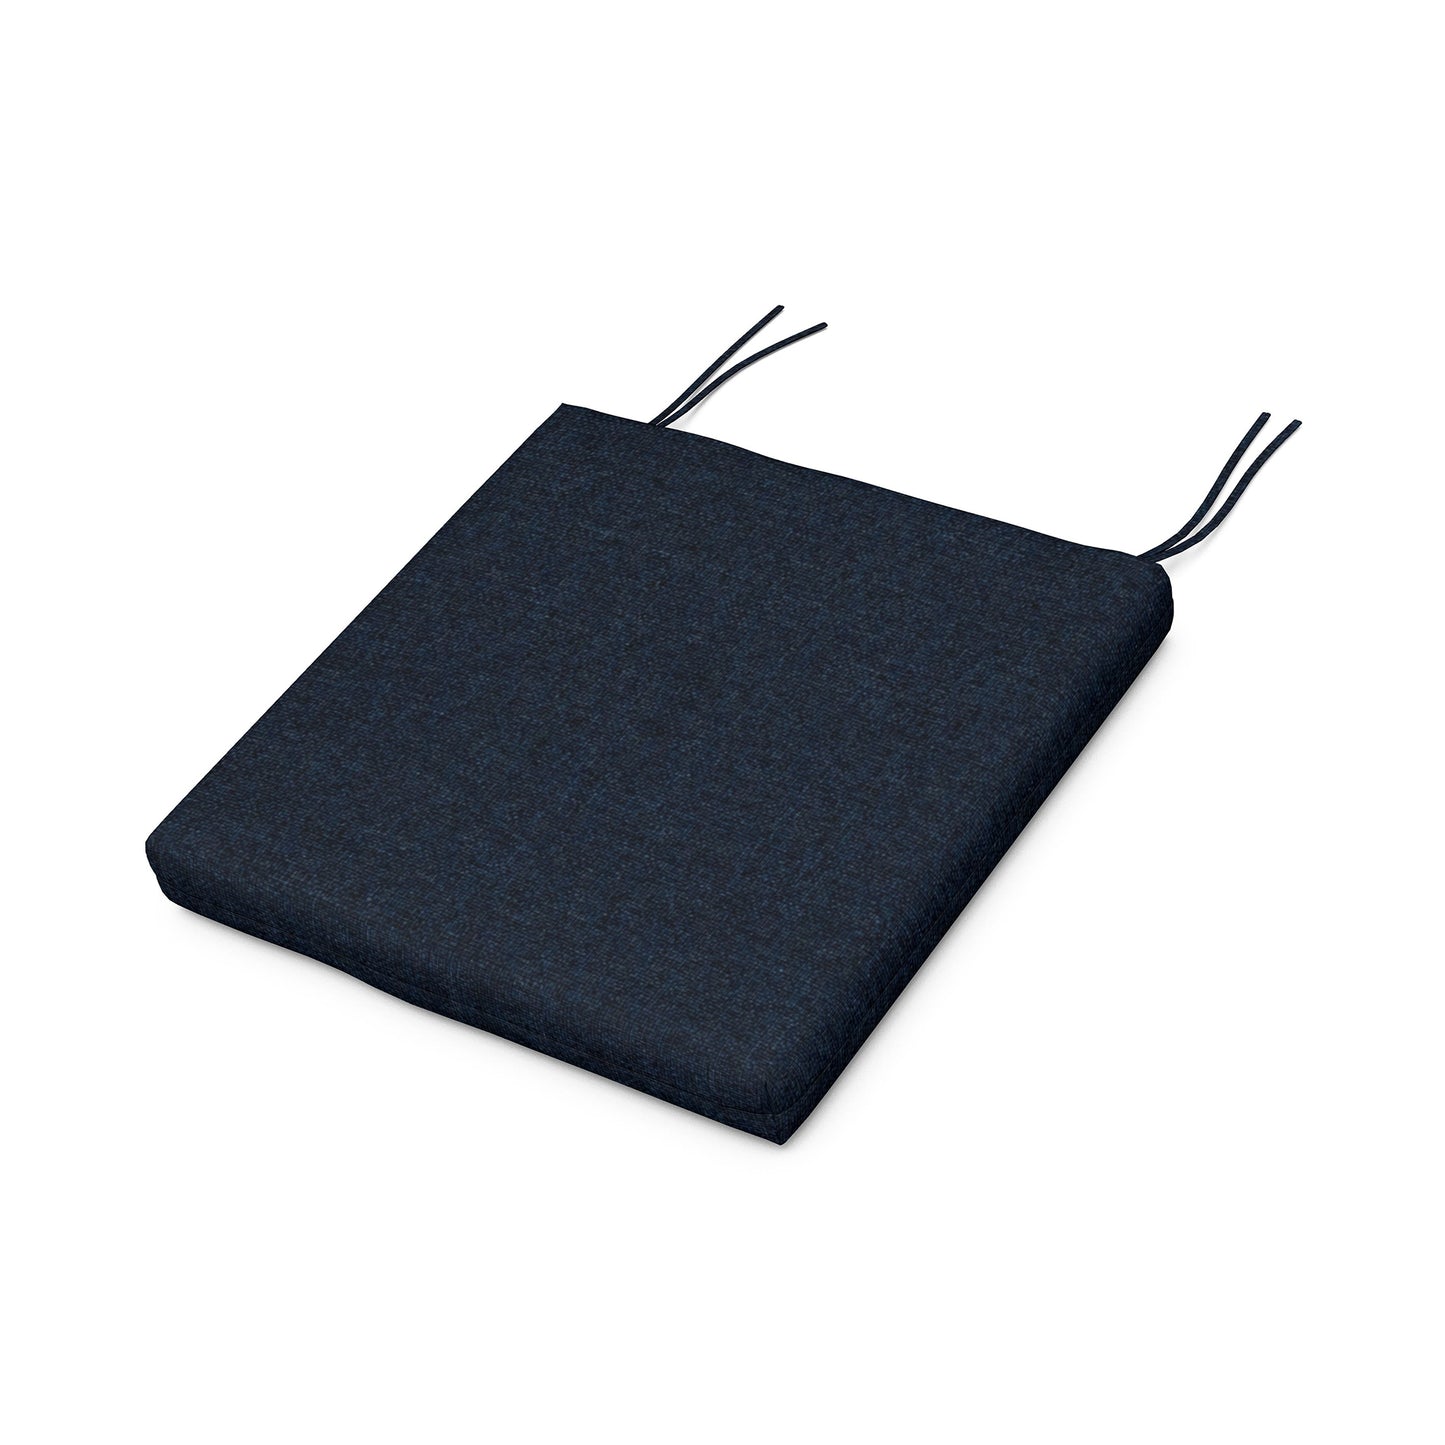 A dark blue, square-shaped POLYWOOD® XPWS0006 - Seat Cushion with two black tying straps at the back, isolated on a white background.